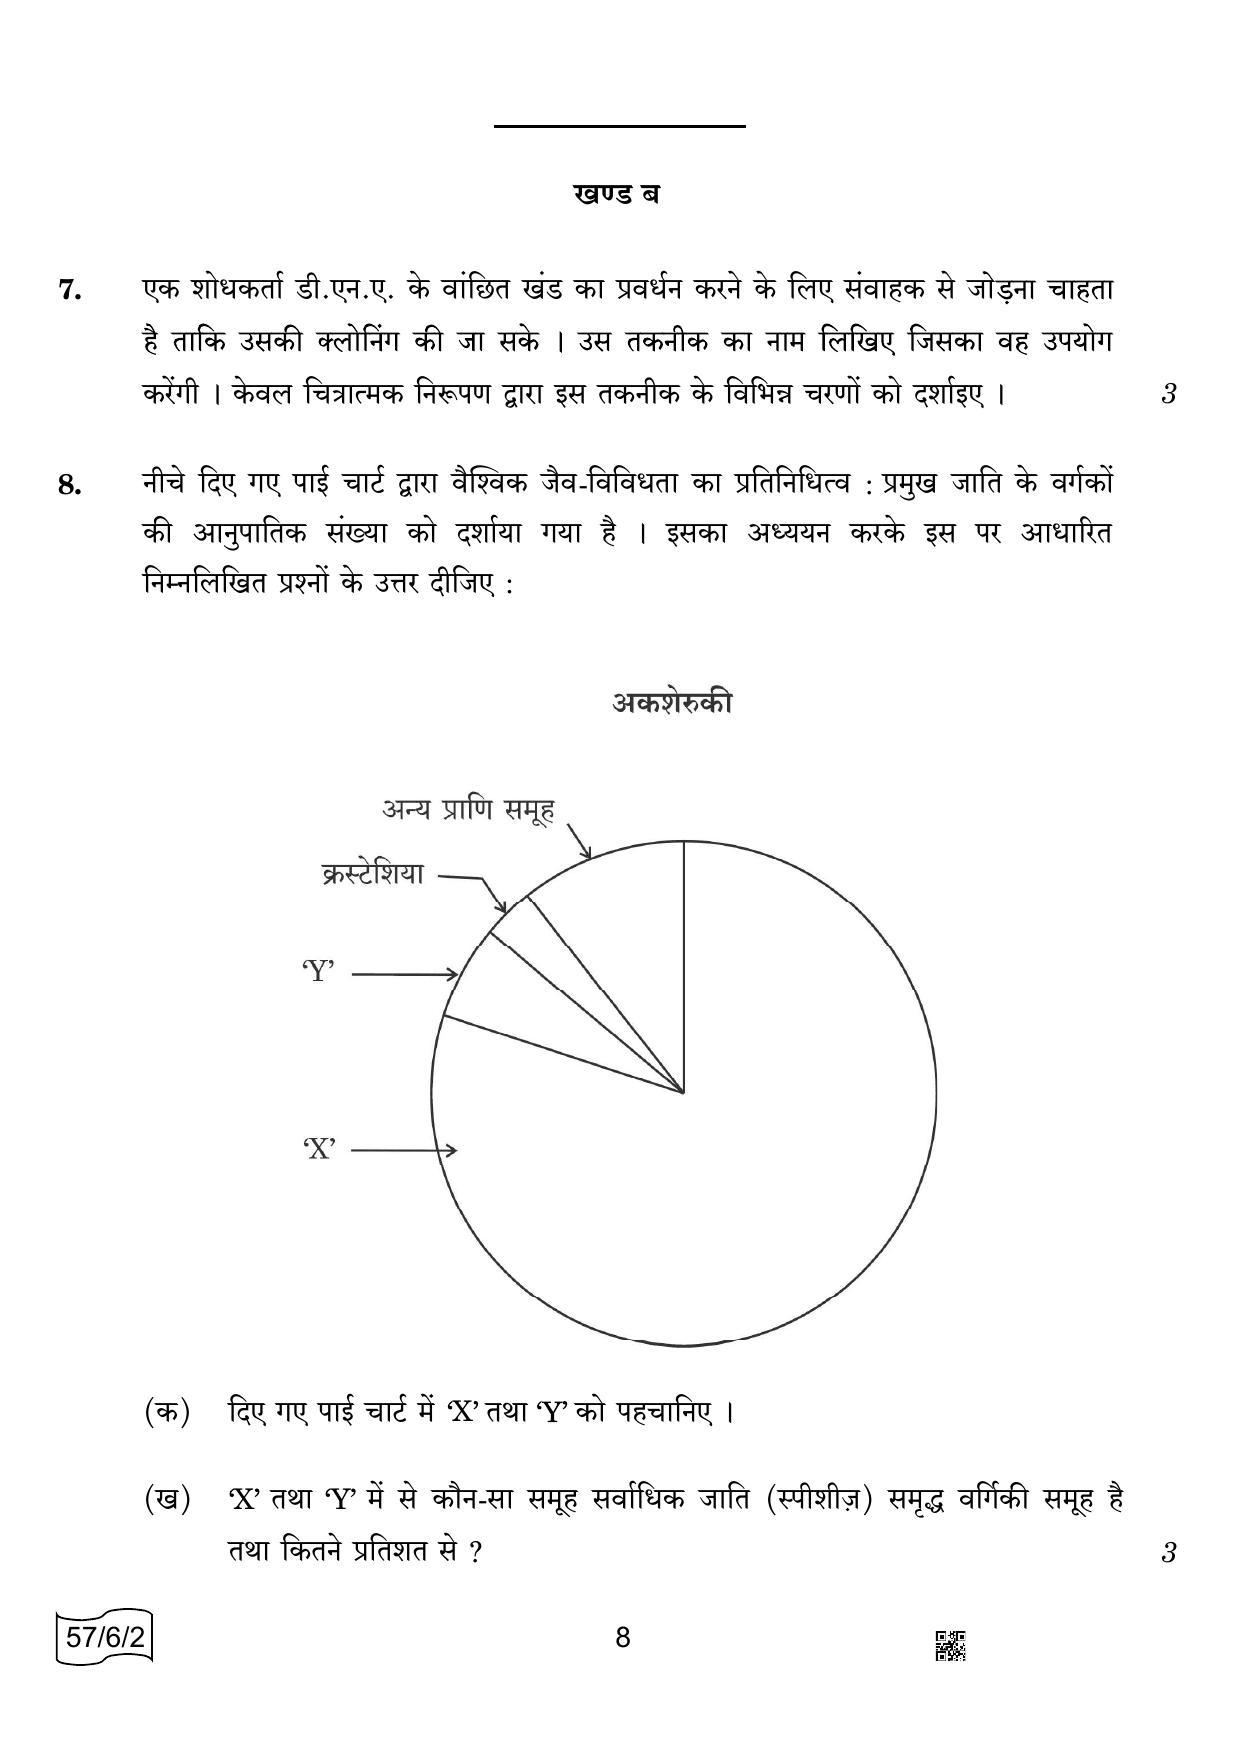 CBSE Class 12 57-6-2 BIOLOGY 2022 Compartment Question Paper - Page 8